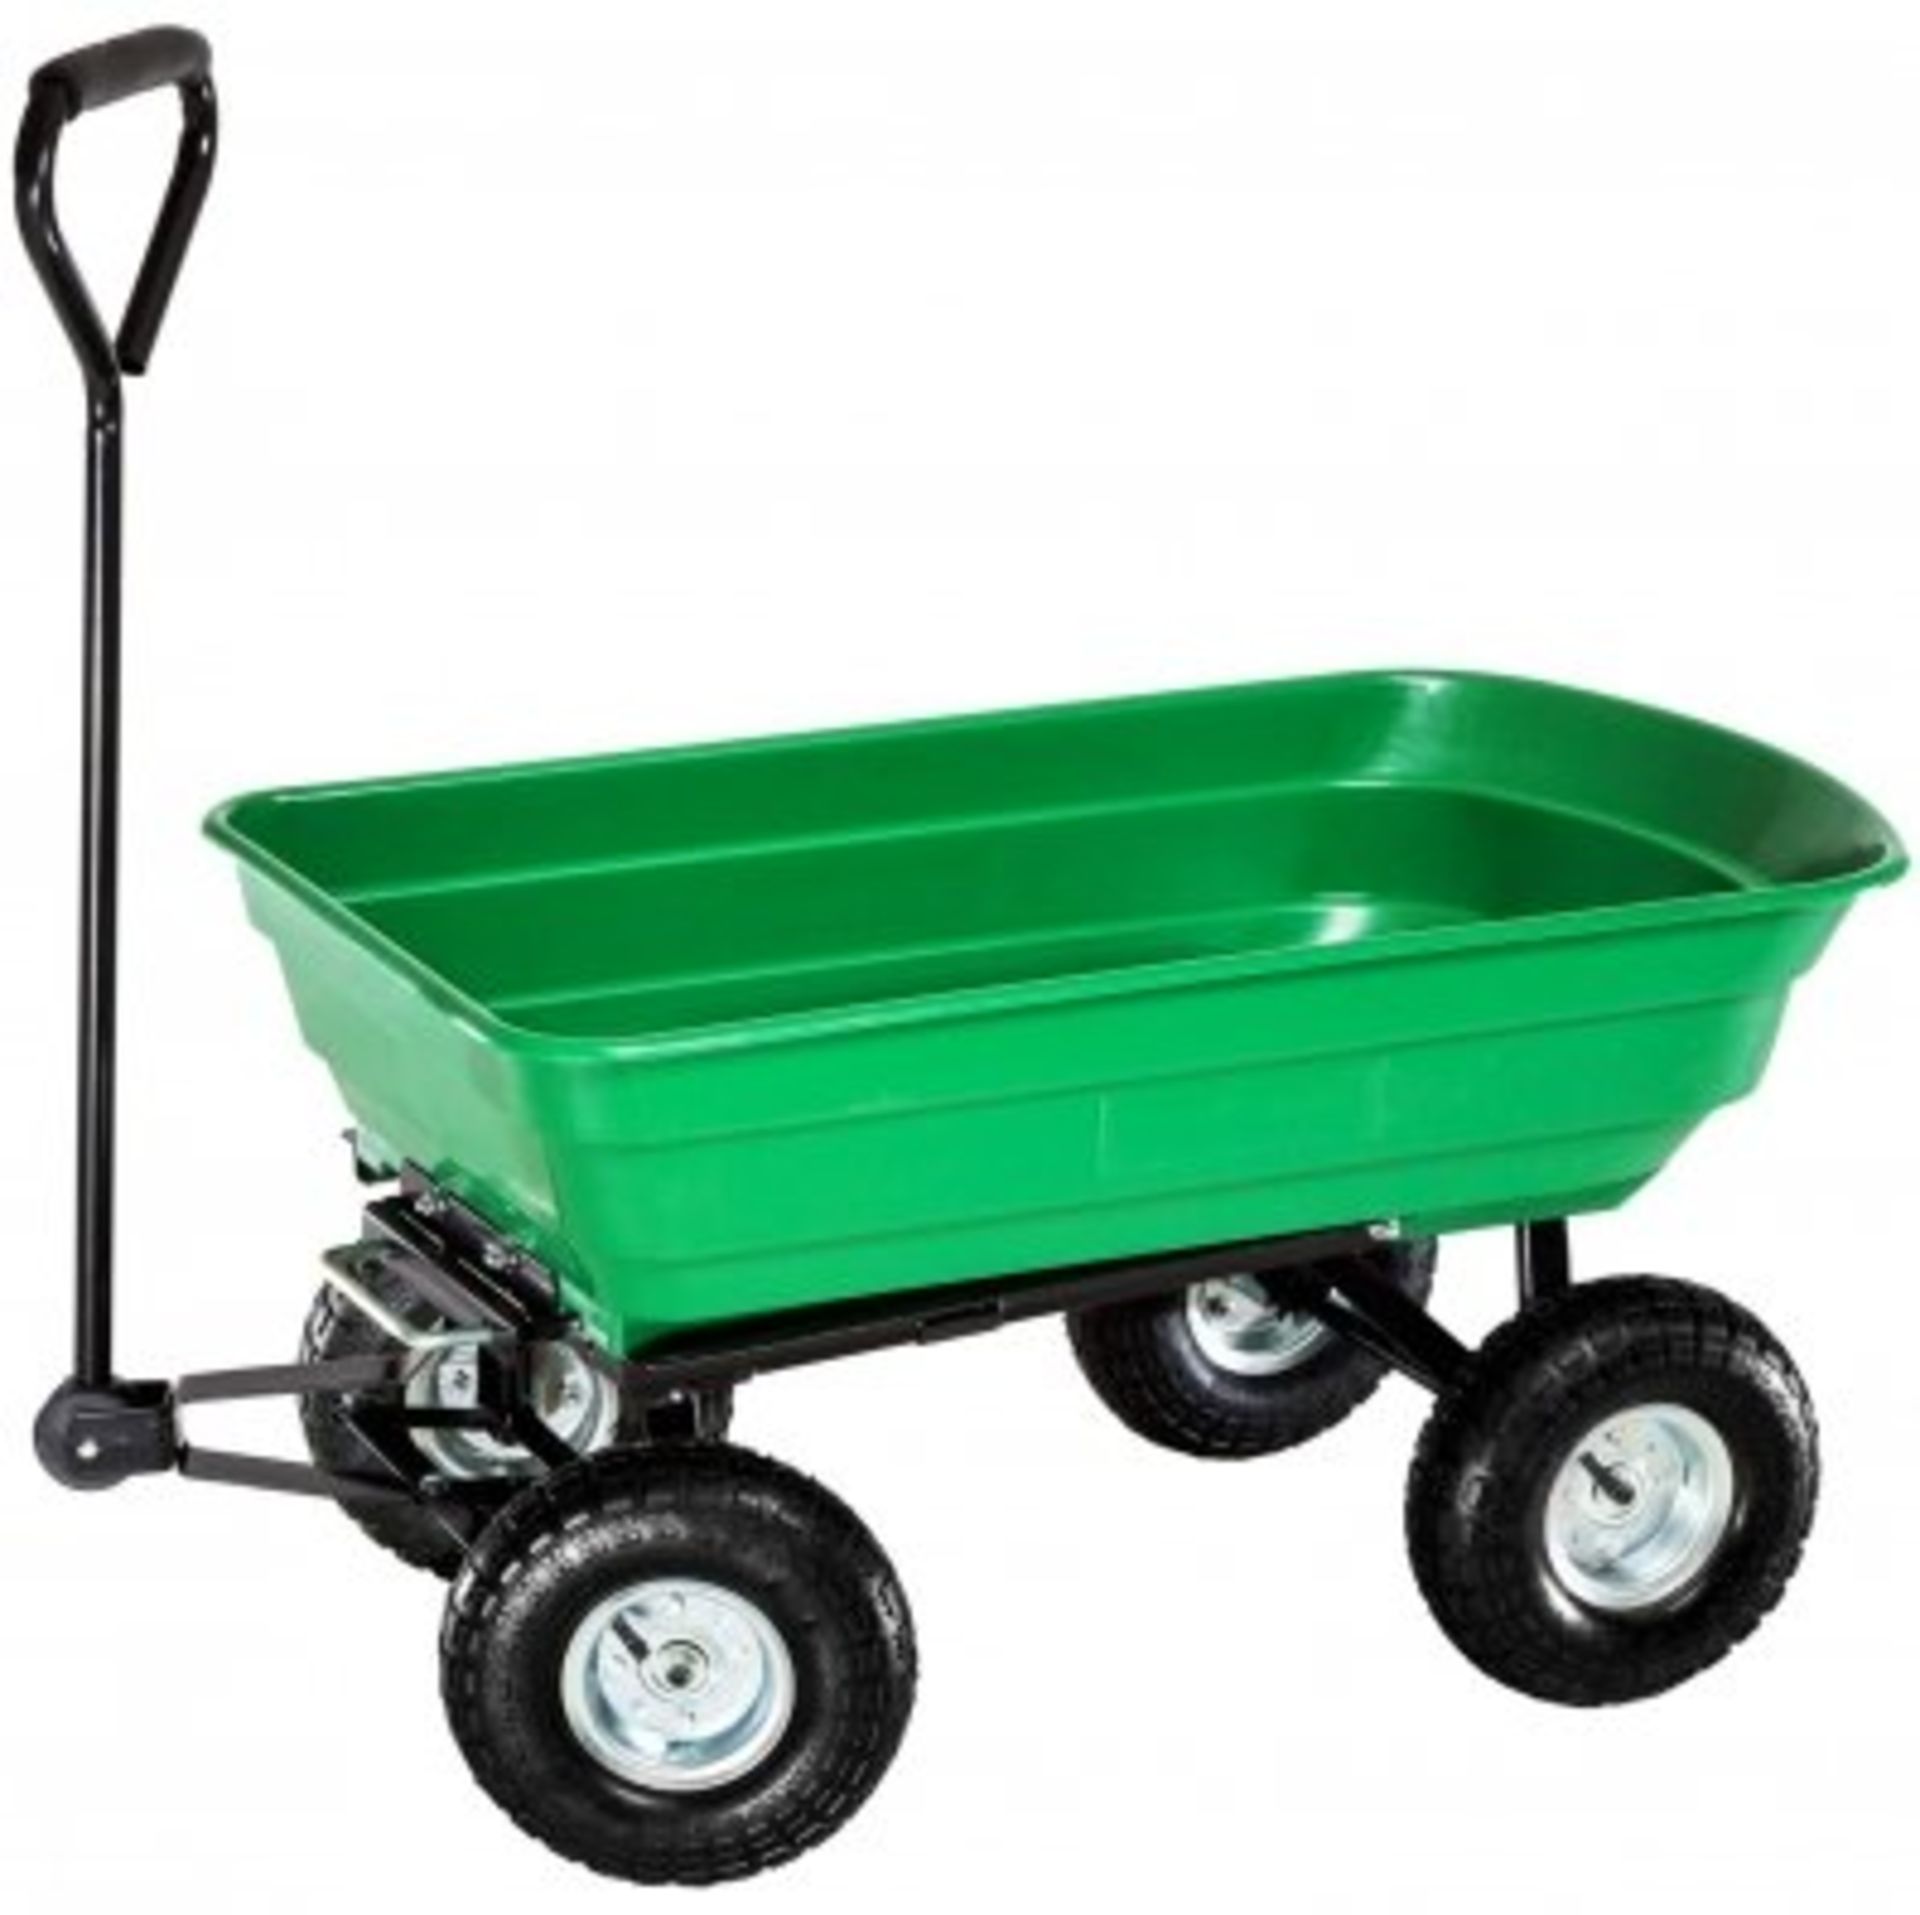 (KK1) This ultimate garden cart with tipping function will prove to be an invaluable asset...